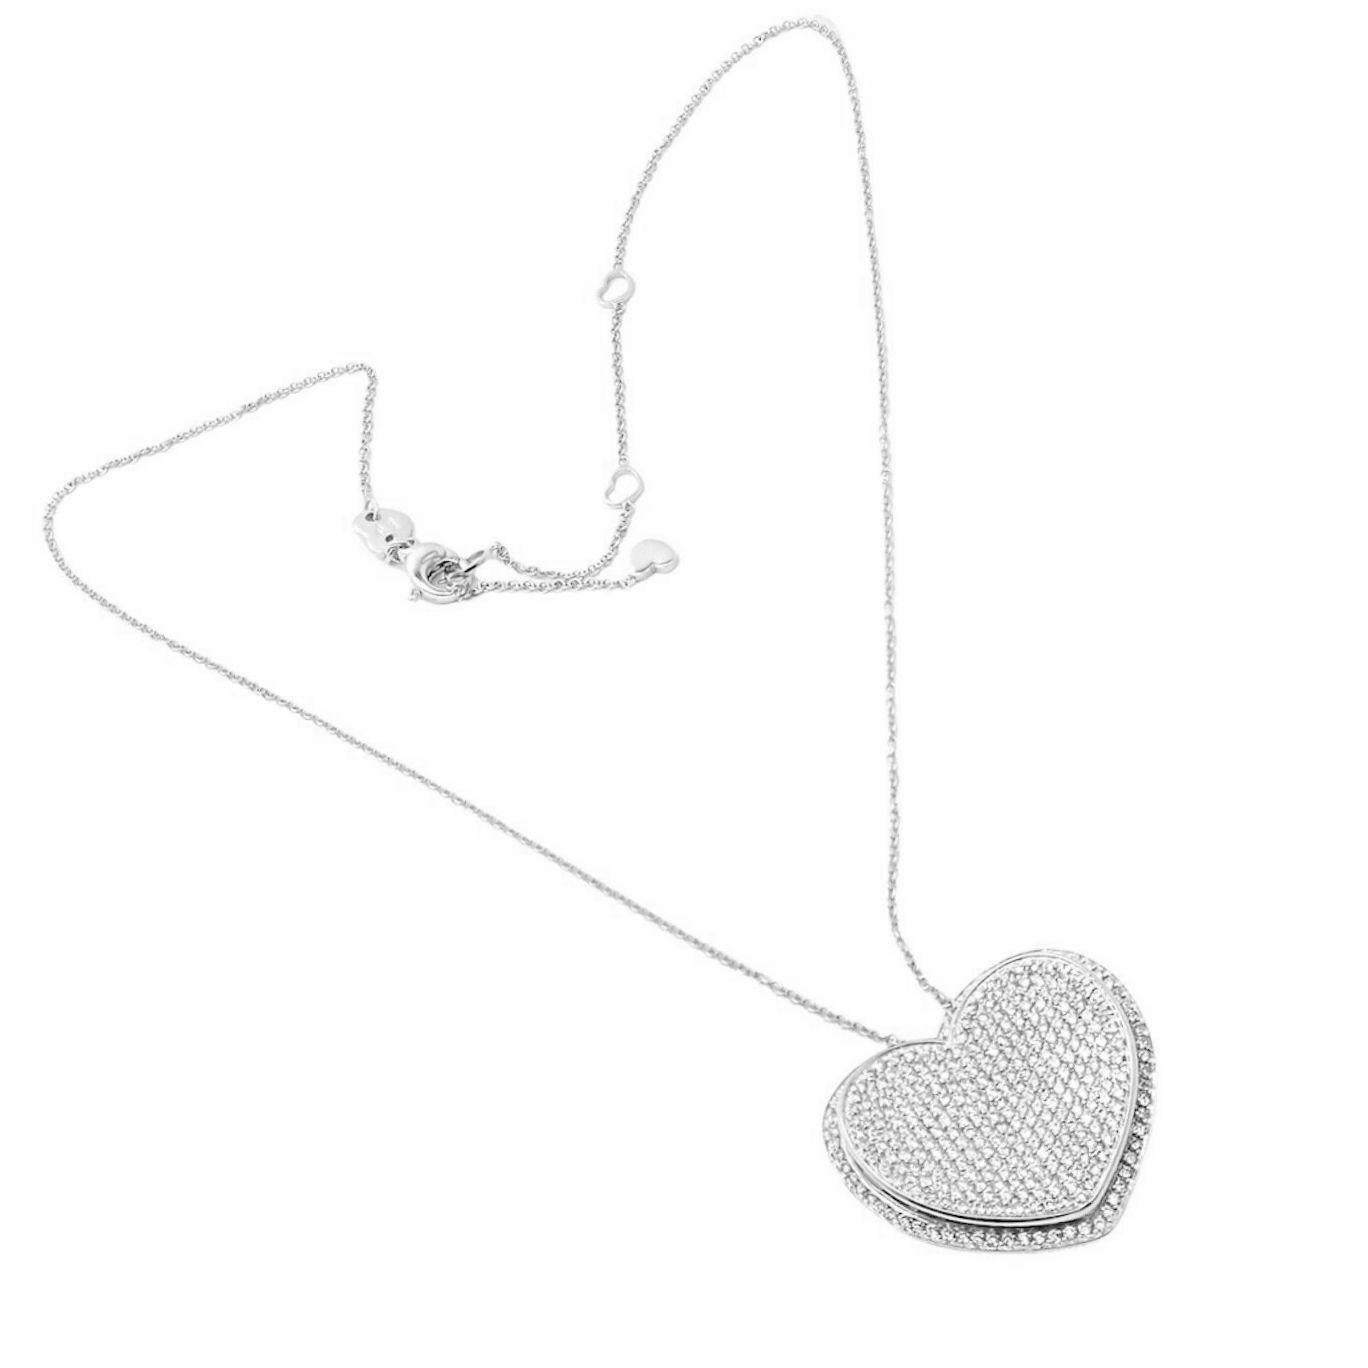 18k White Gold Heart Liberty Diamond Pendant Necklace
by Pasquale Bruni.
With Round brilliant cut diamonds VS1 clarity, G color total weight approx. 2.02ct
This necklace comes with Box and Certificate.
Details:
Length: 18.25 inches total length,